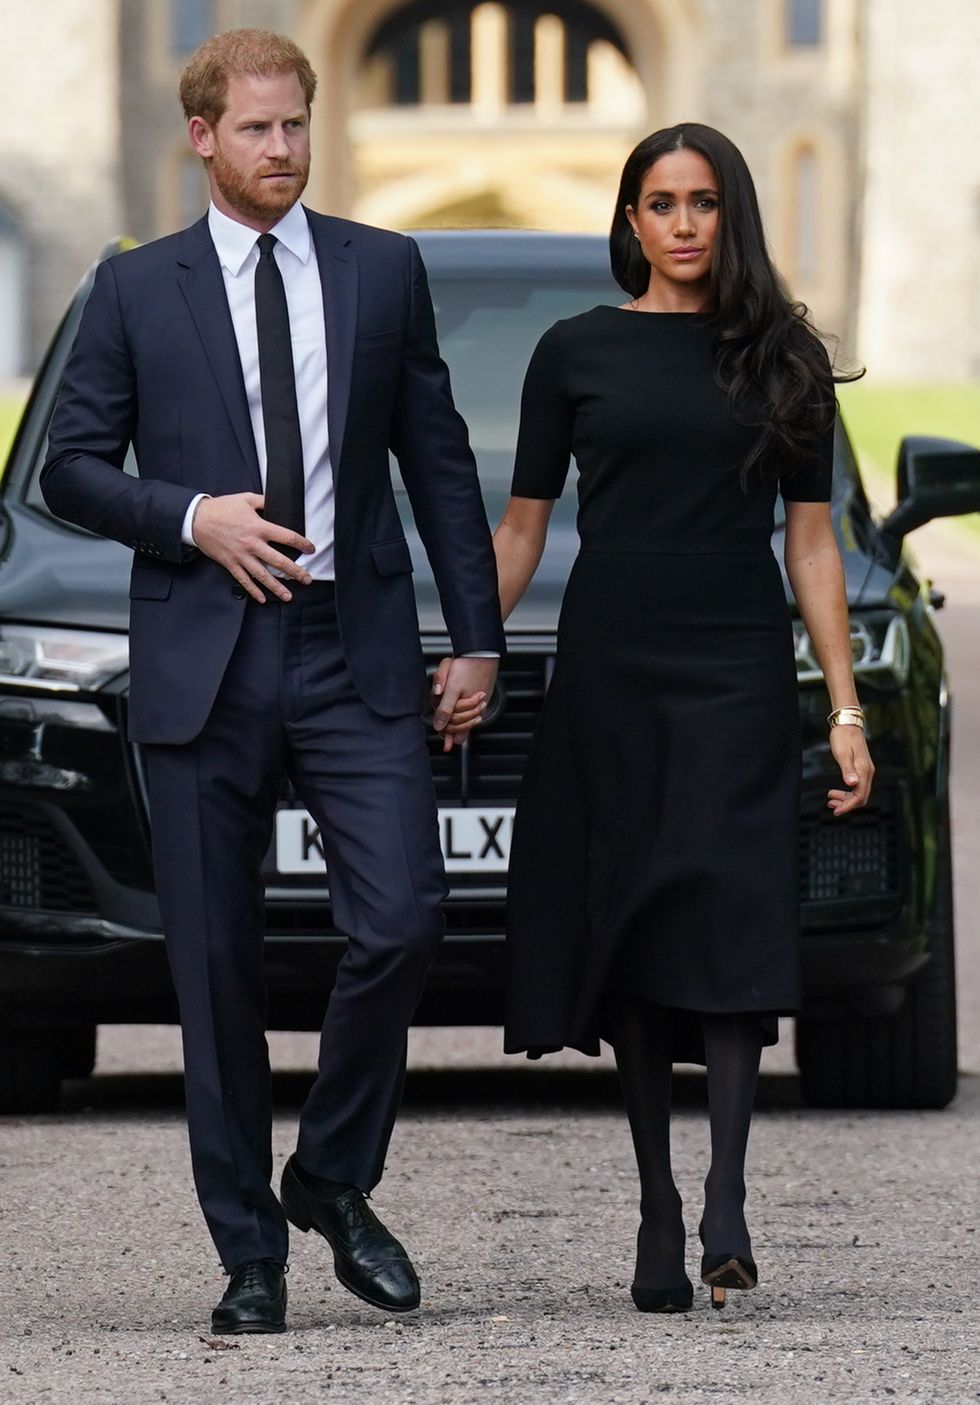 Meghan Markle and Prince Harry are 'panicked' and 'at odds' with Netflix after having 'second thoughts' about the tone of their docuseries